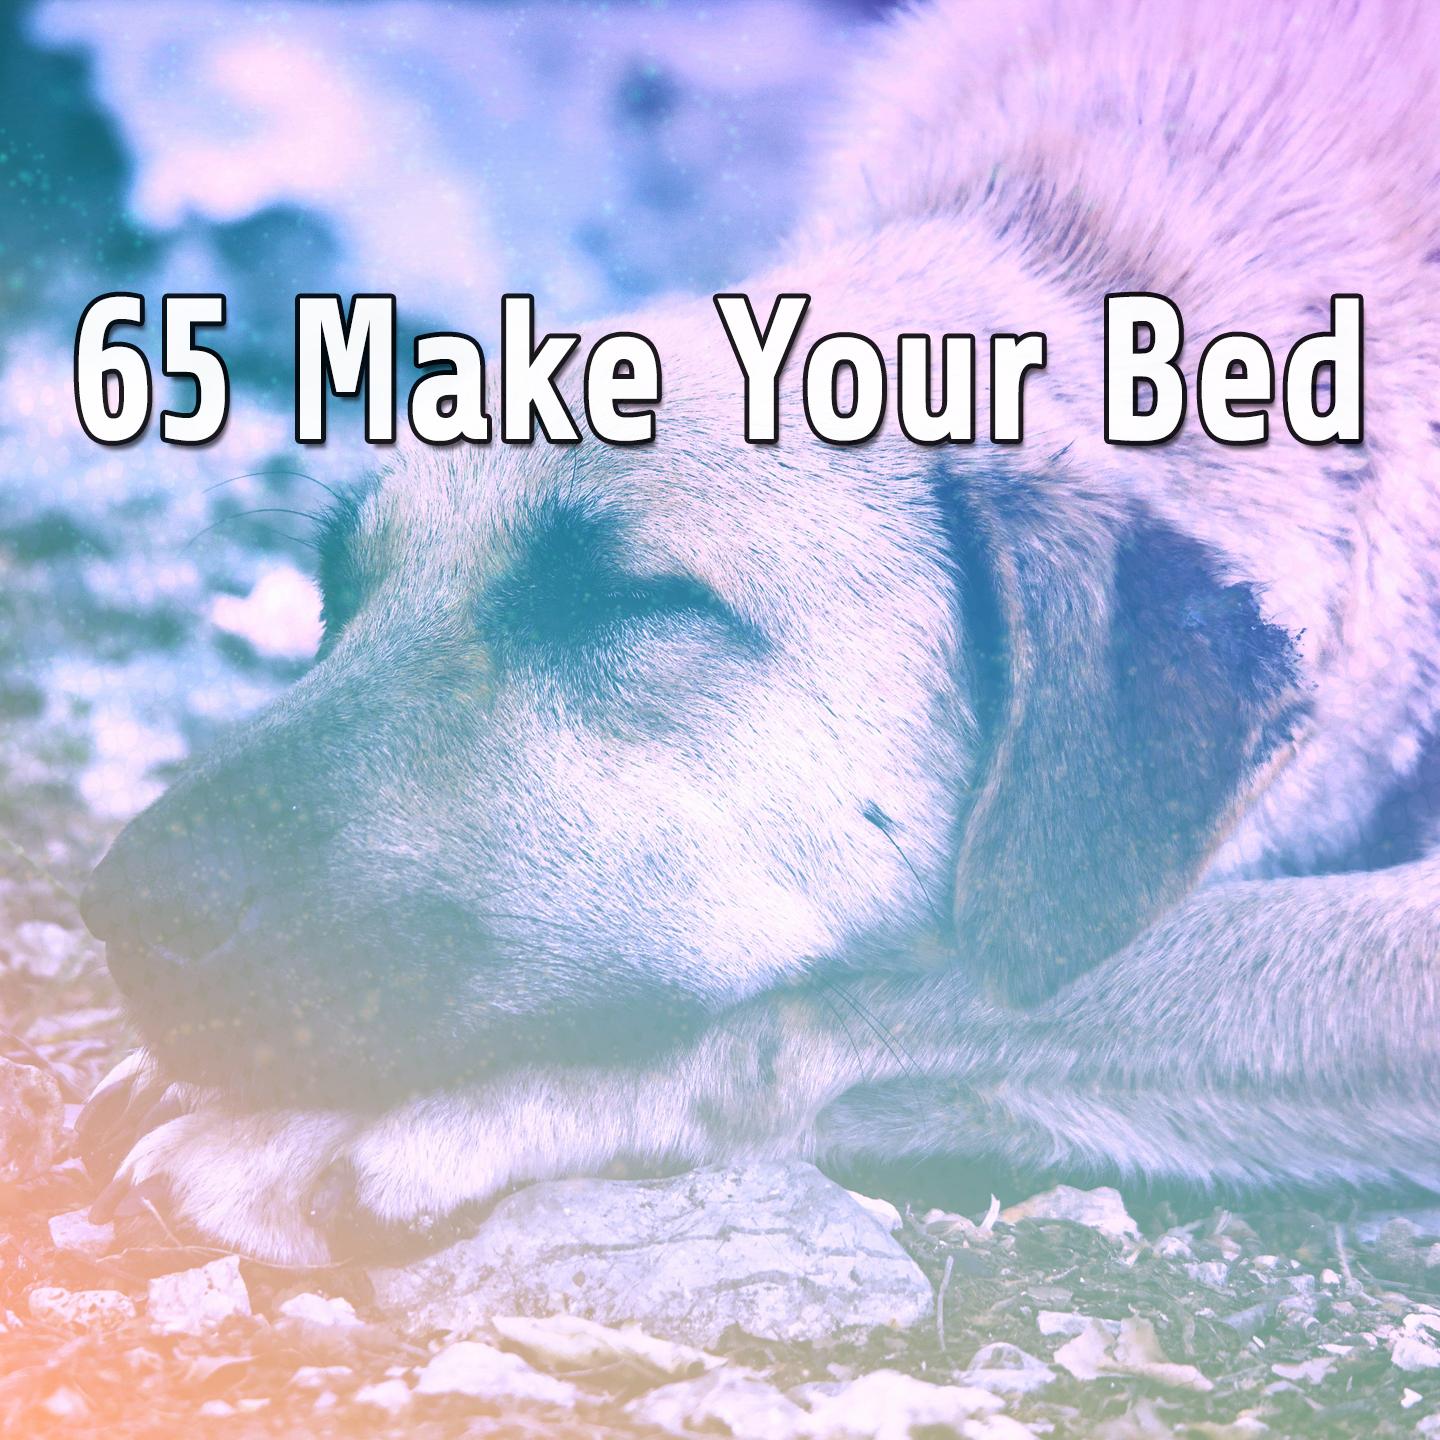 65 Make Your Bed